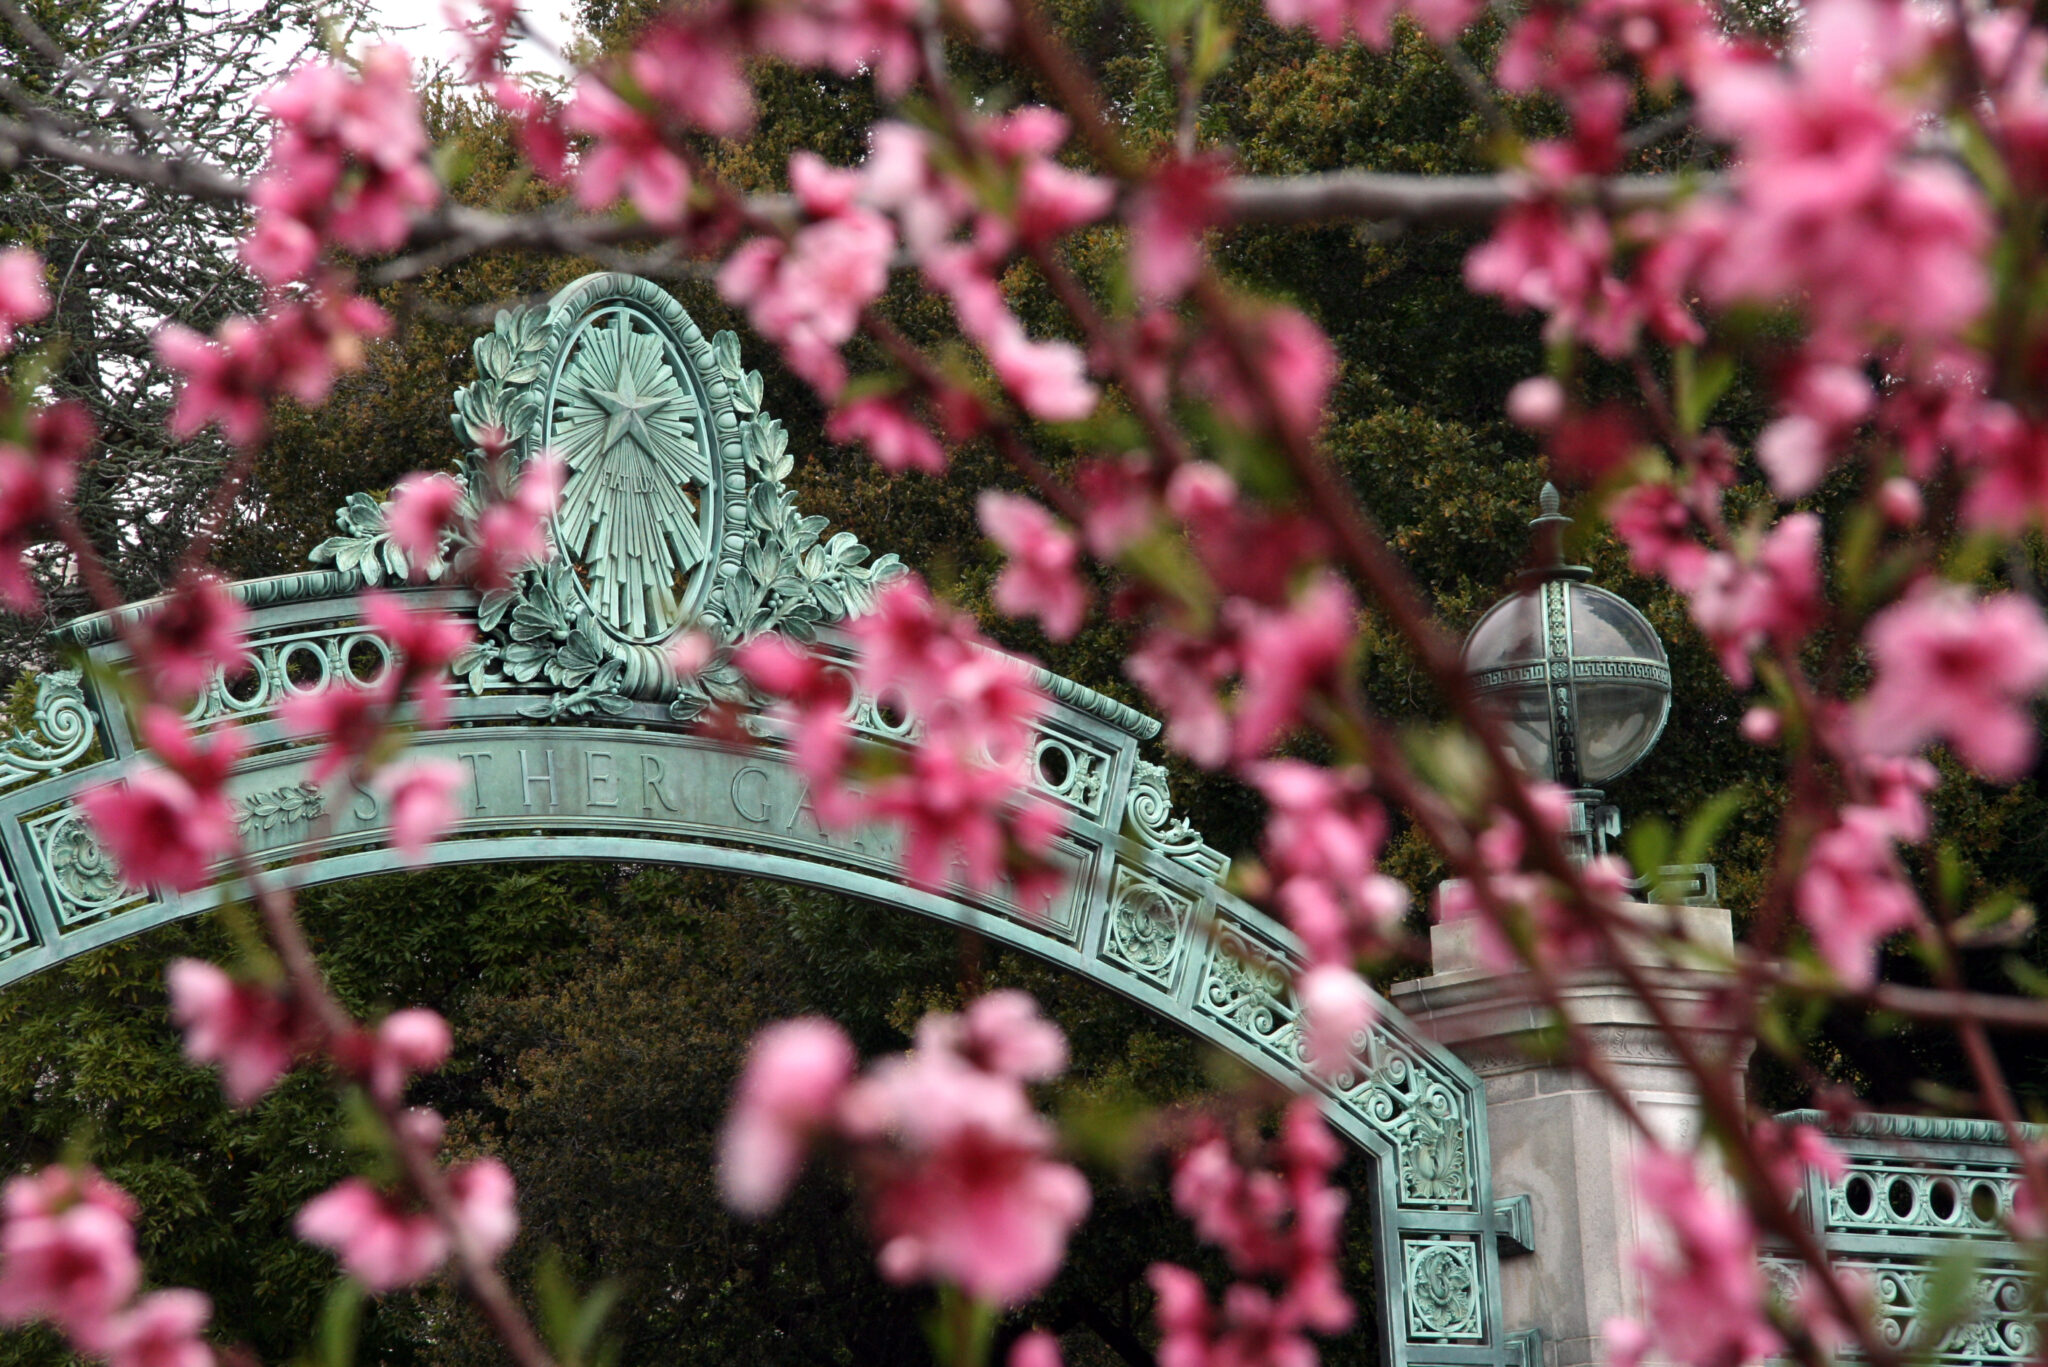 Sather Gate seen through pink flowers.